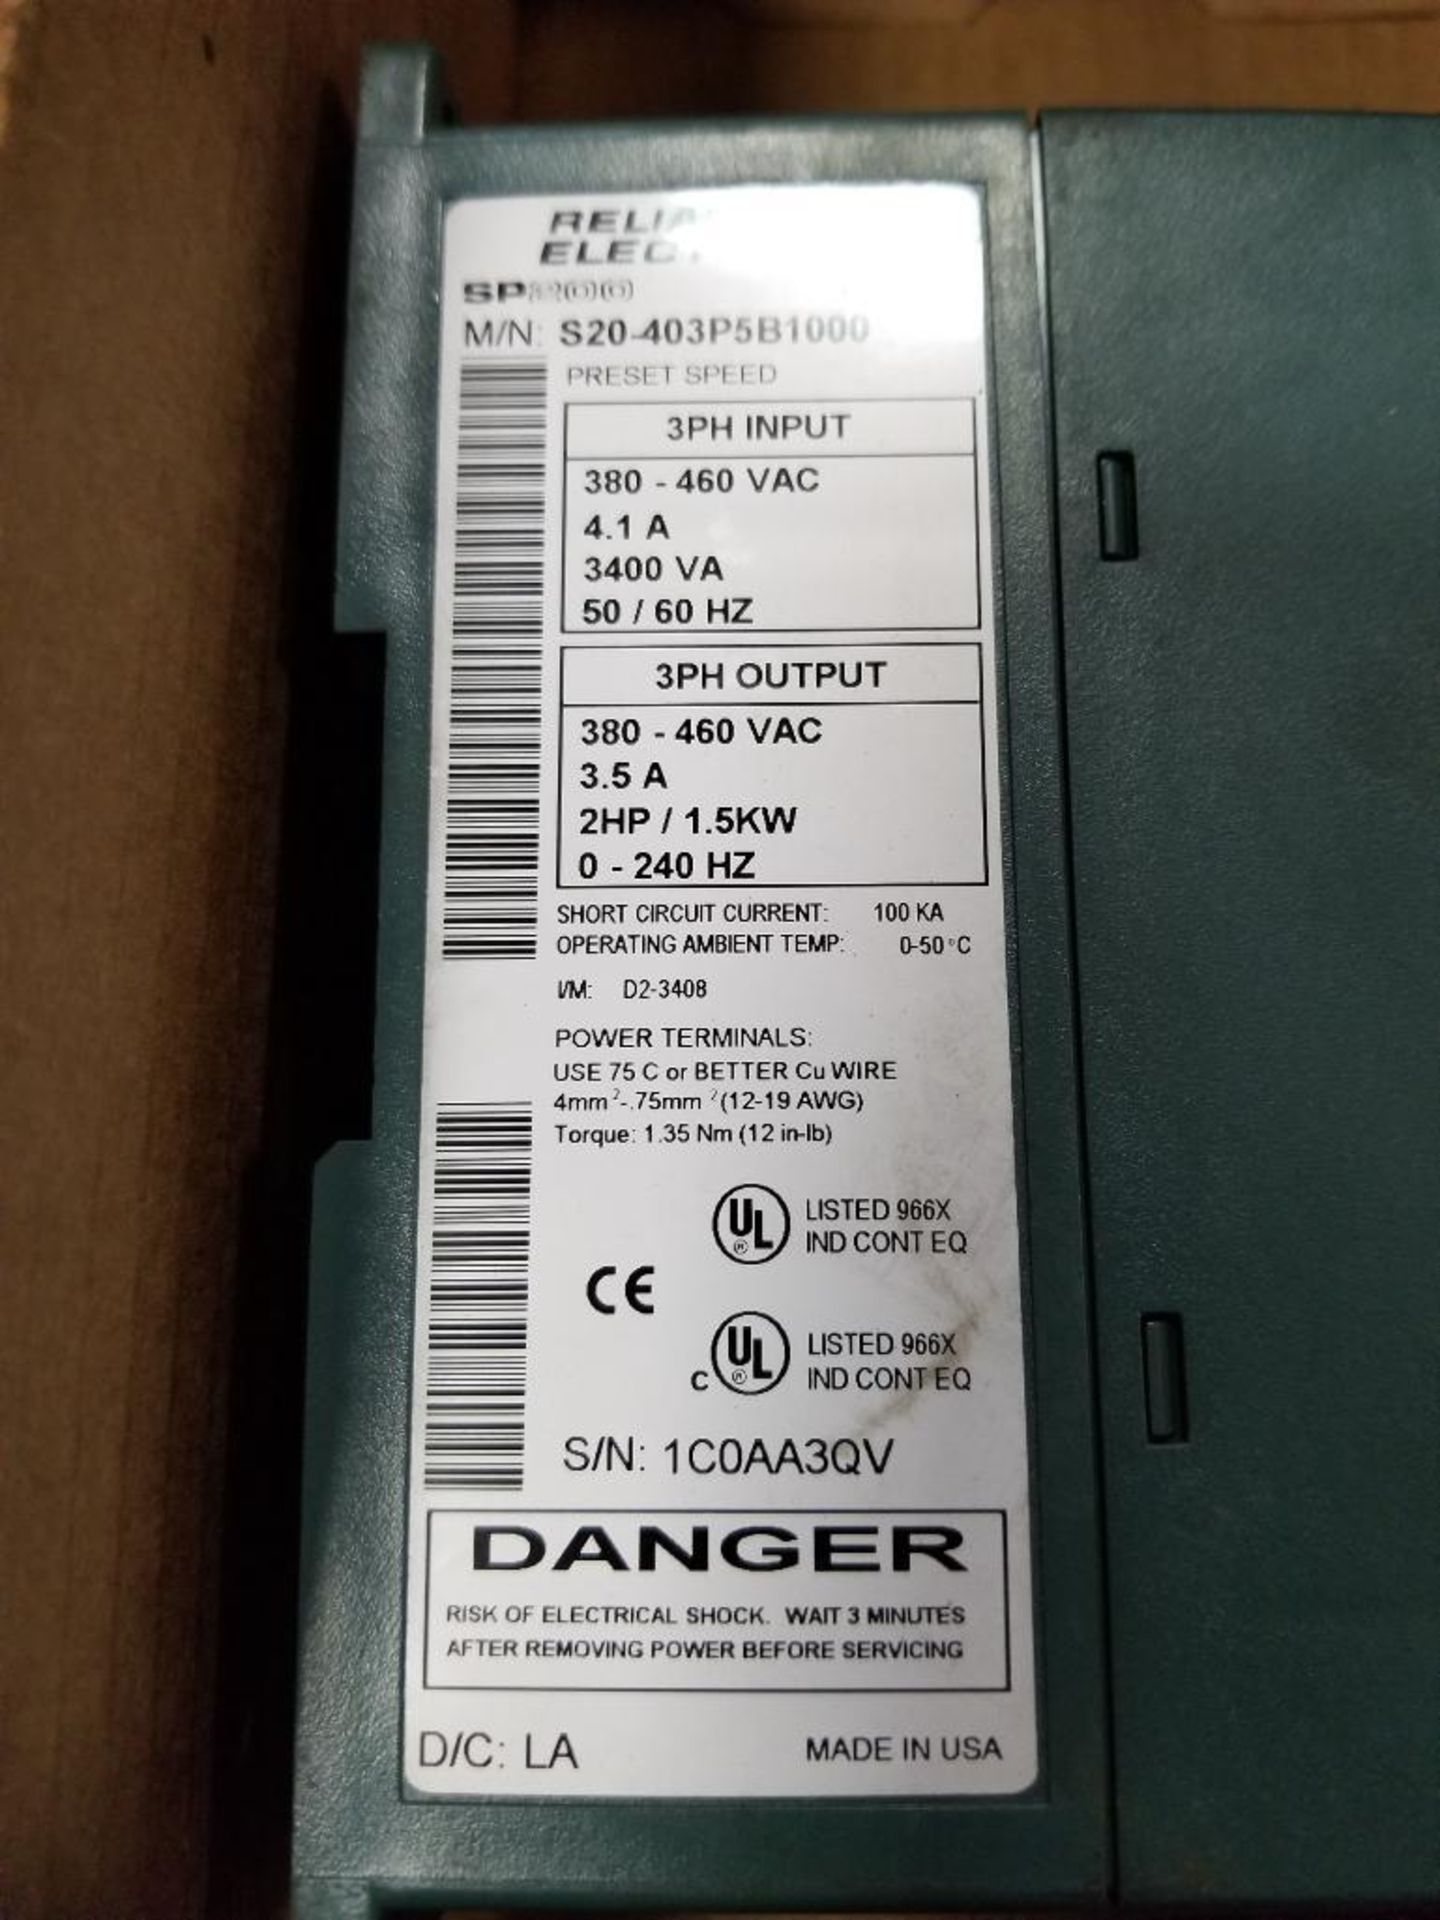 Reliance Electric SP200 AC Drive S20-403P5B1000. 2HP/1.5kW. - Image 5 of 5